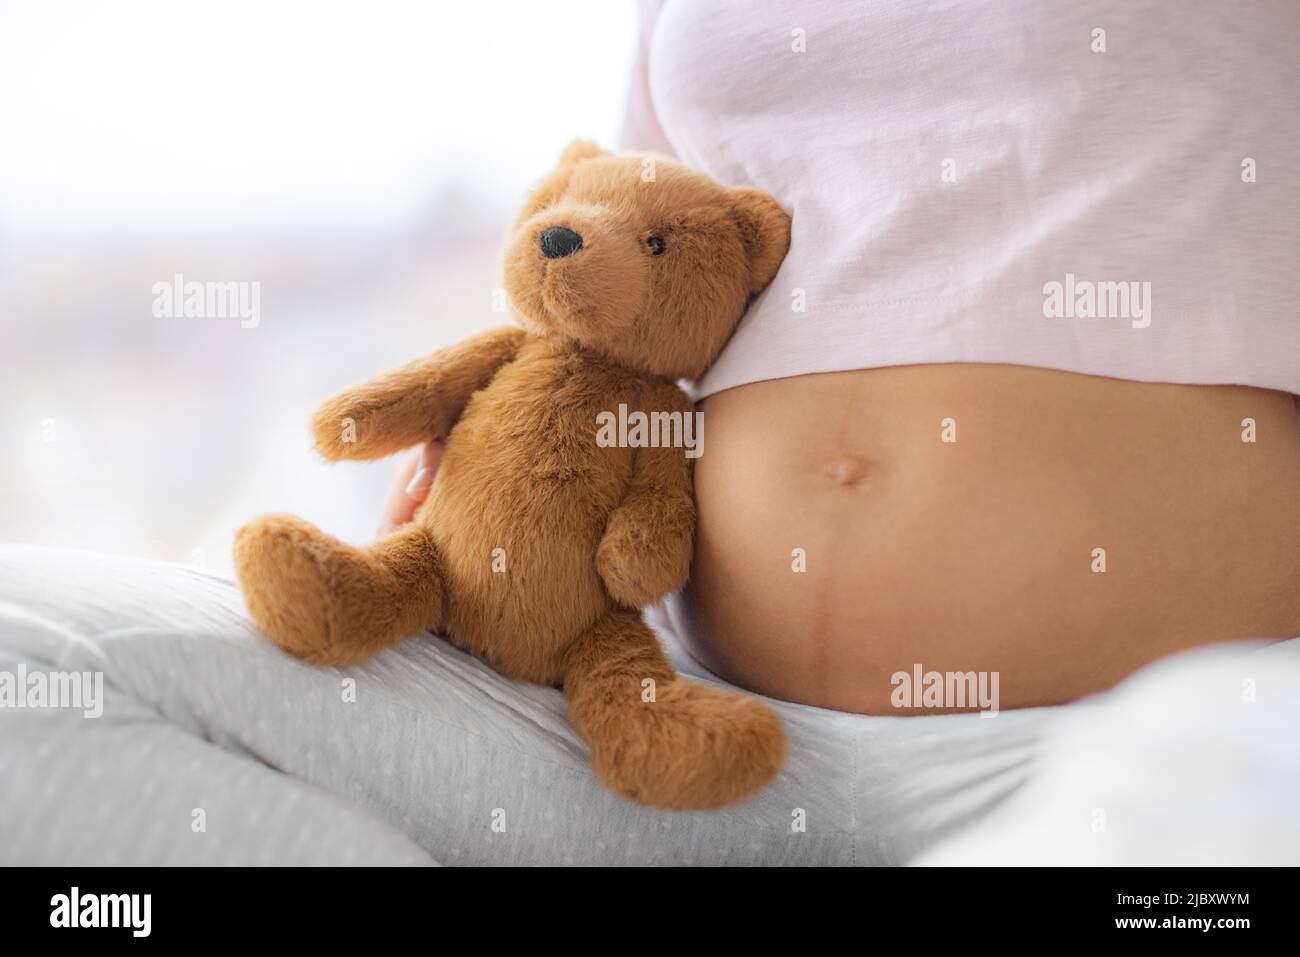 Pregnant woman belly closeup with baby toy teddy bear plush. Skincare, stretch mark, common skin problems of pregnancy. Healthy expecting girl Stock Photo